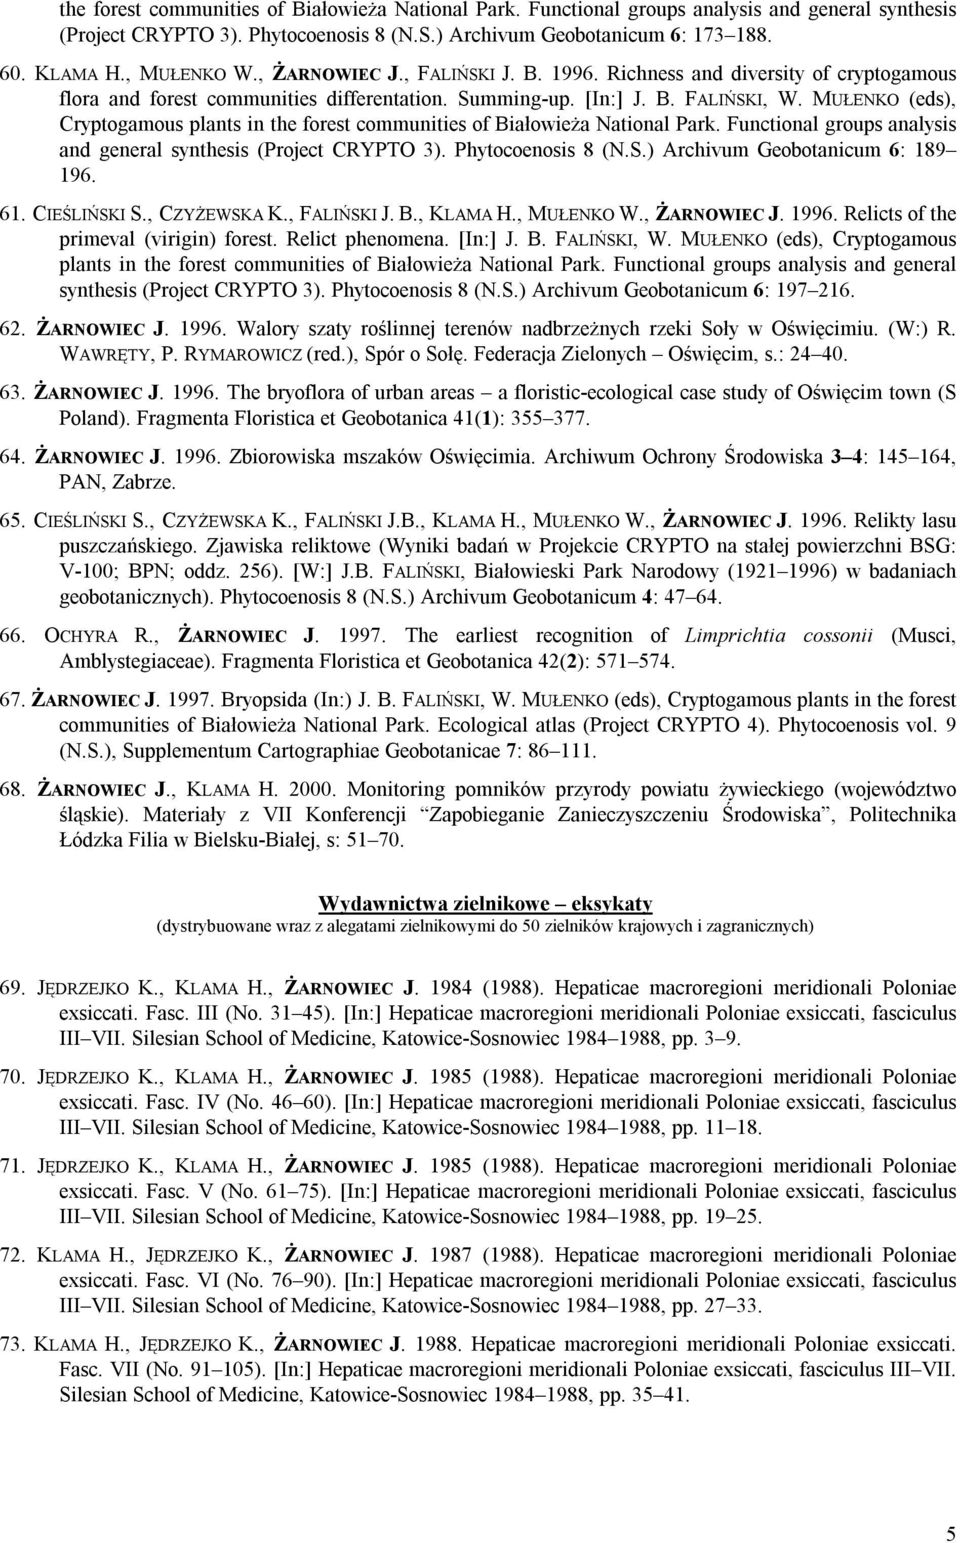 MUŁENKO (eds), Cryptogamous plants in the forest communities of Białowieża National Park. Functional groups analysis and general synthesis (Project CRYPTO 3). Phytocoenosis 8 (N.S.